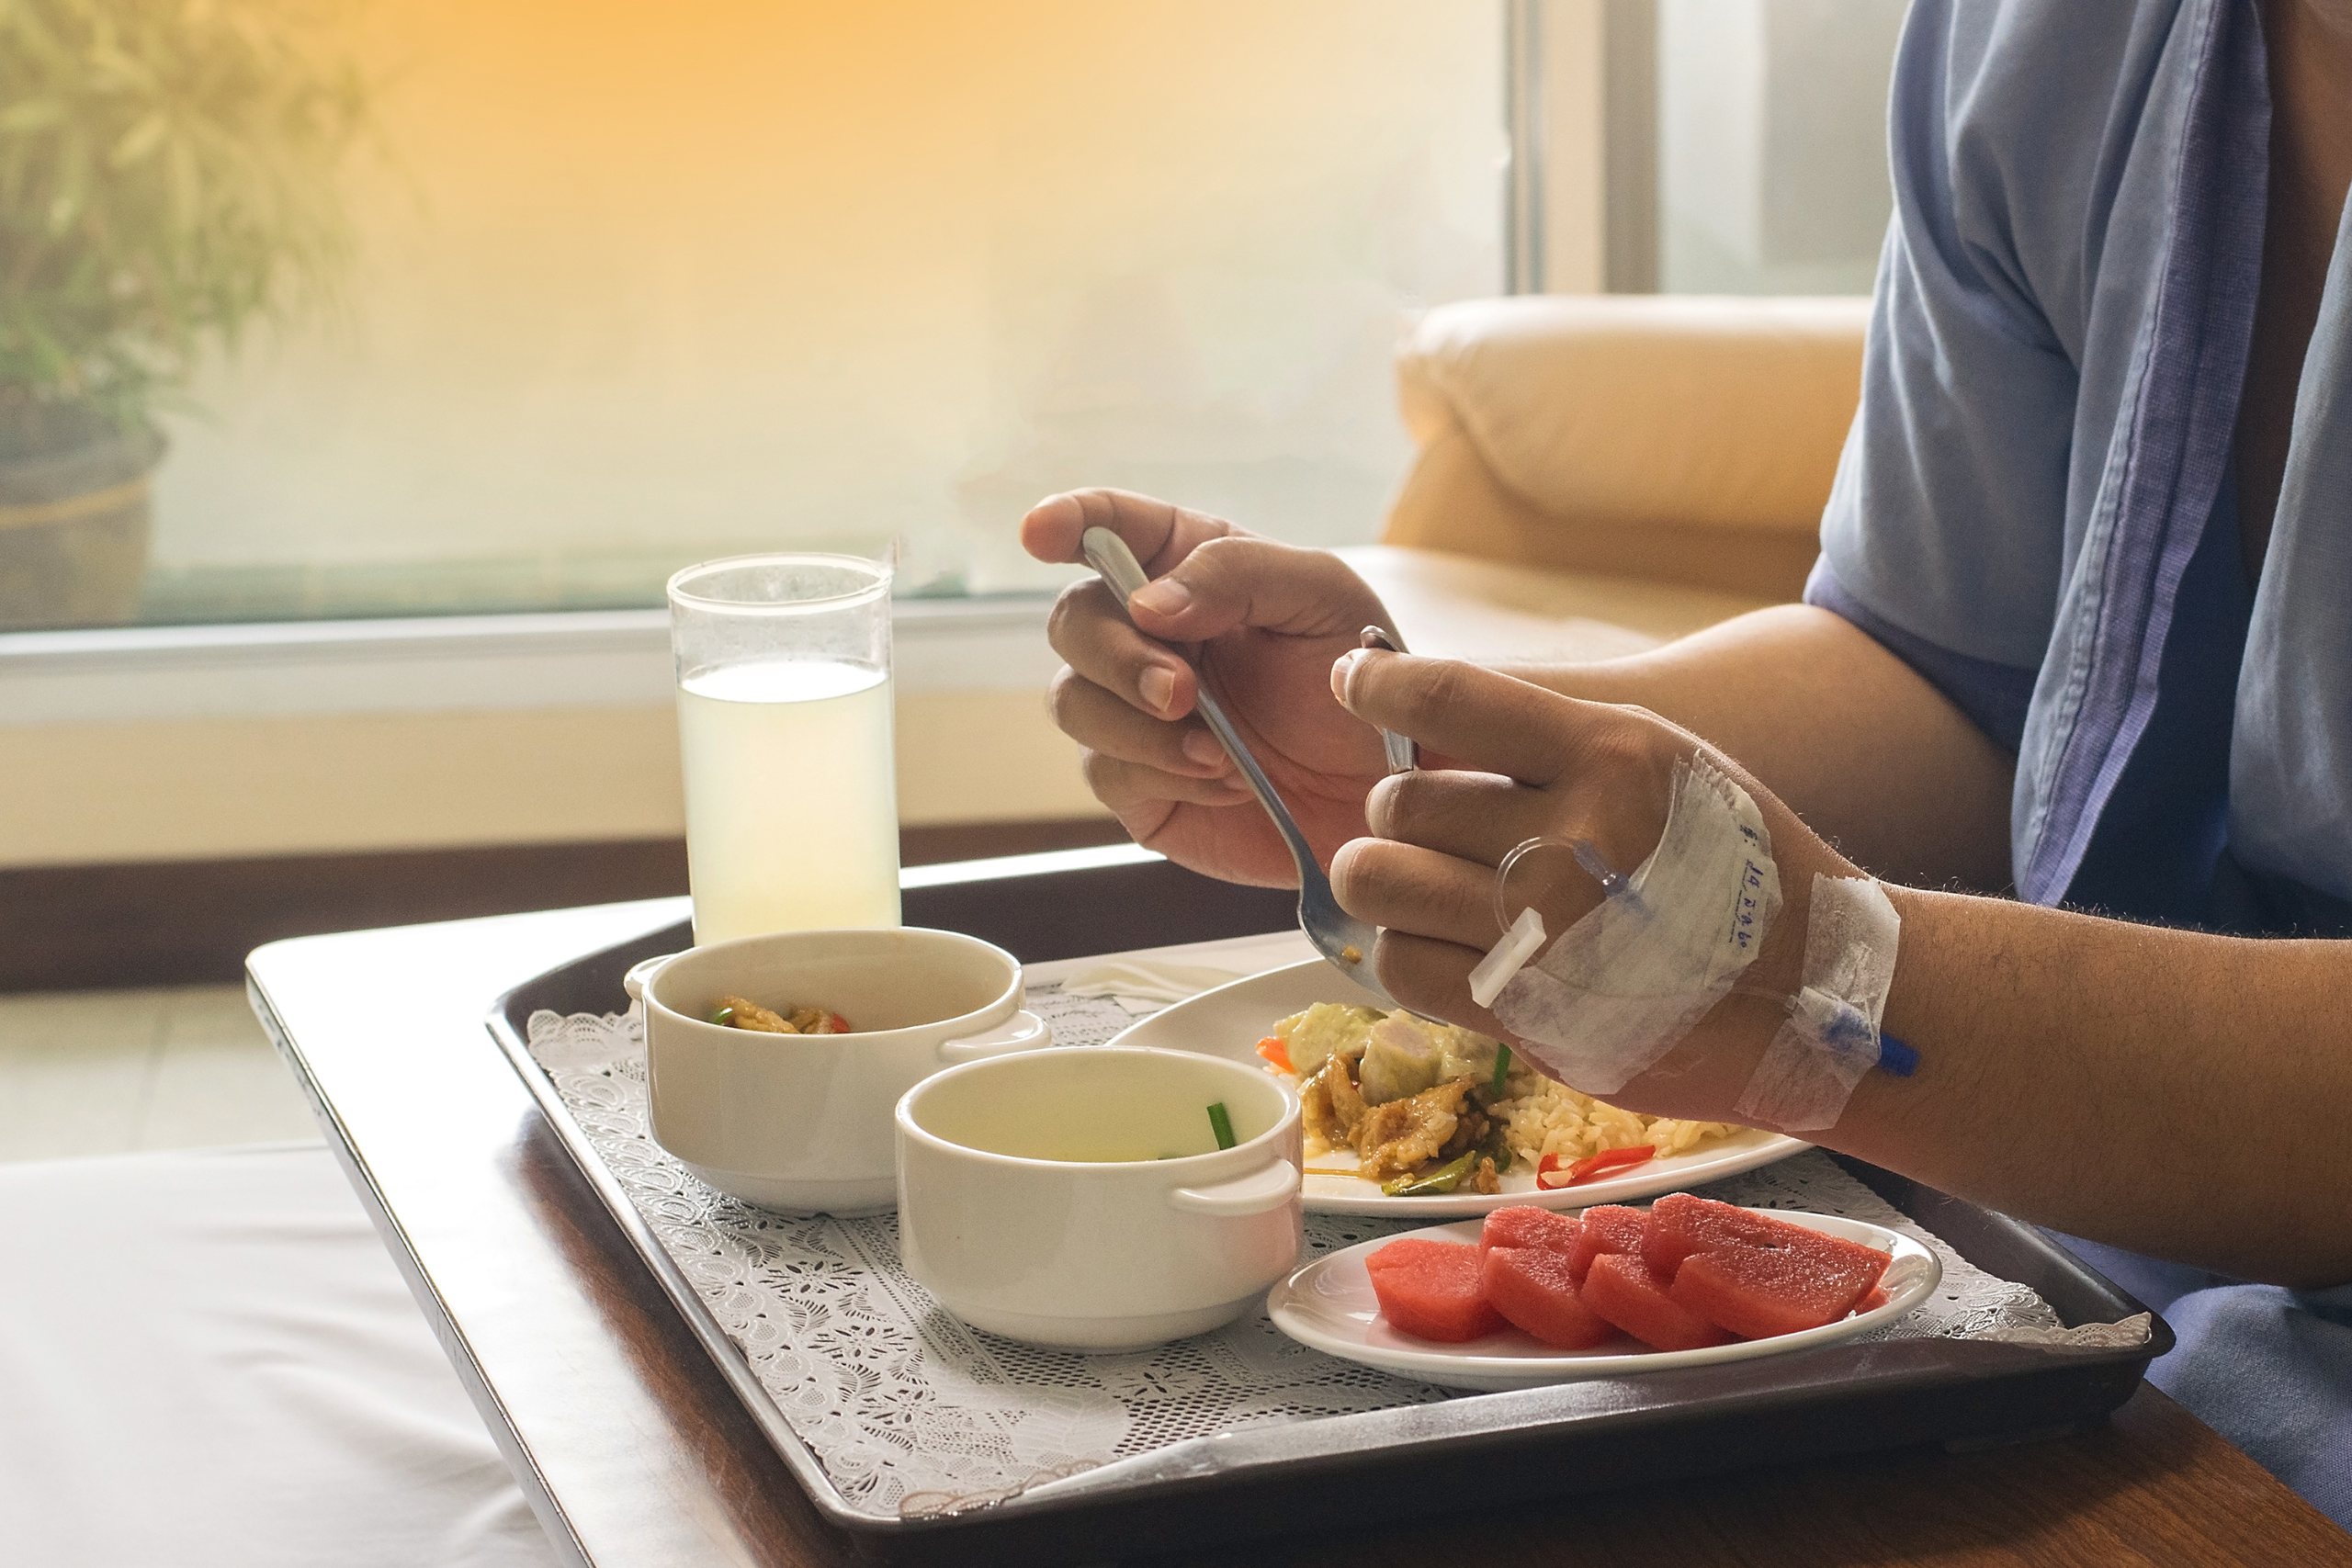 Person in hospital gown eating a nutritious meal on a tray, with water and fresh fruit, emphasizing proper care in nursing homes.